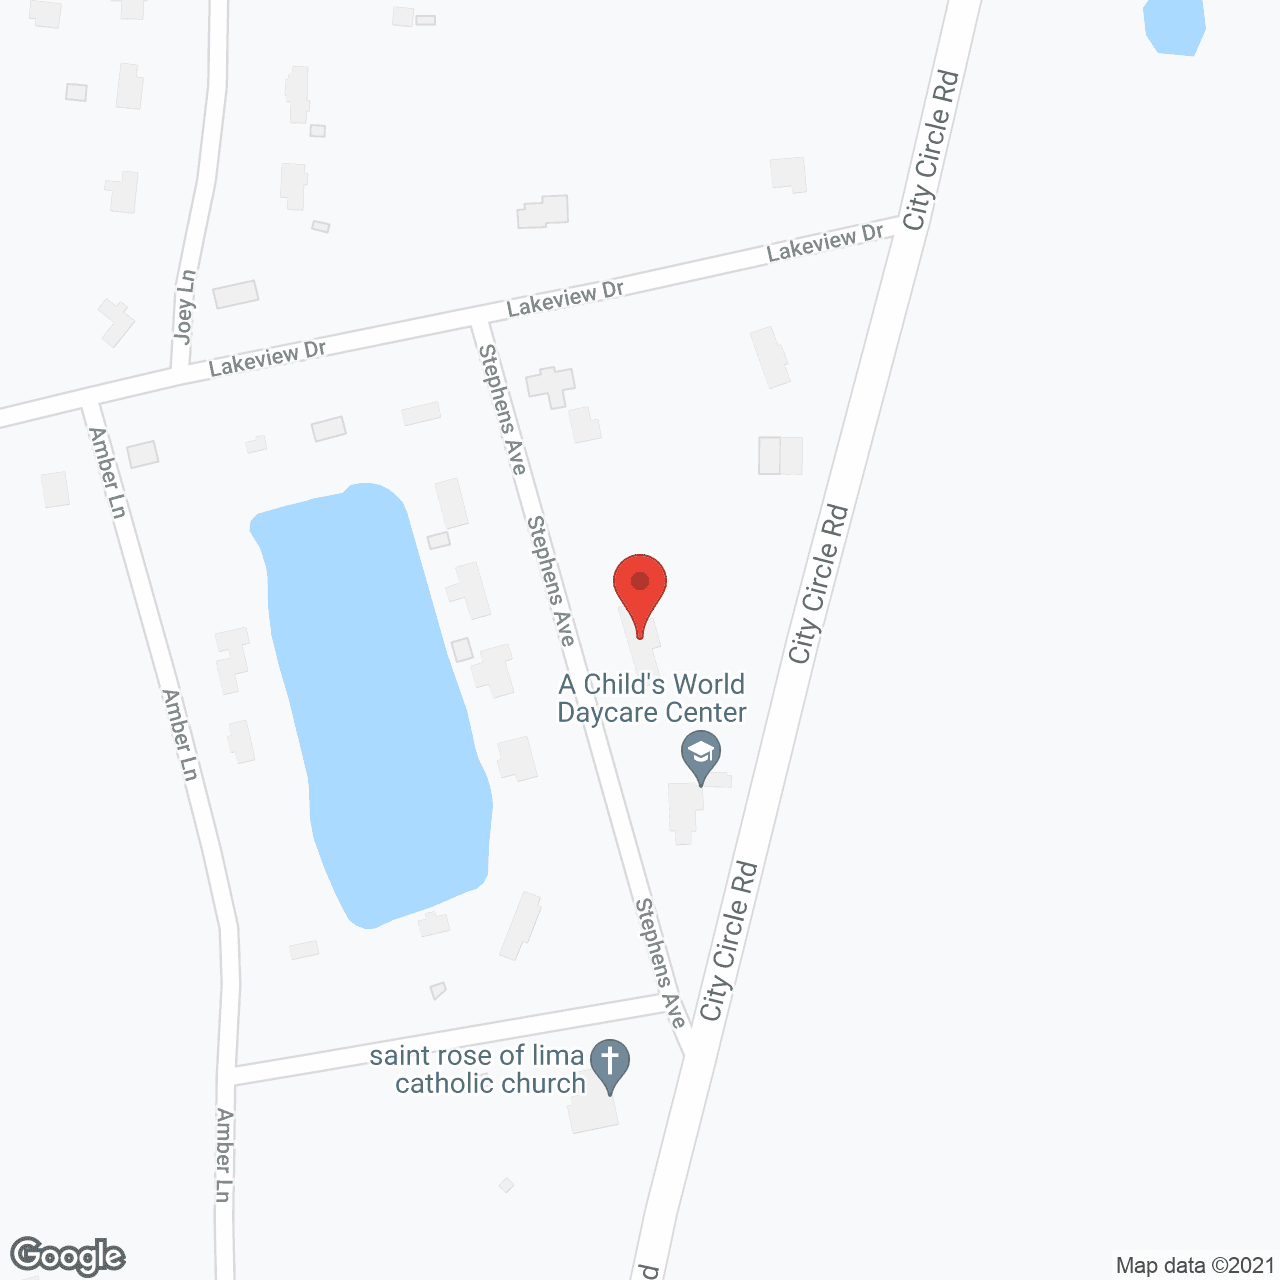 Lakeview Retirement Center in google map